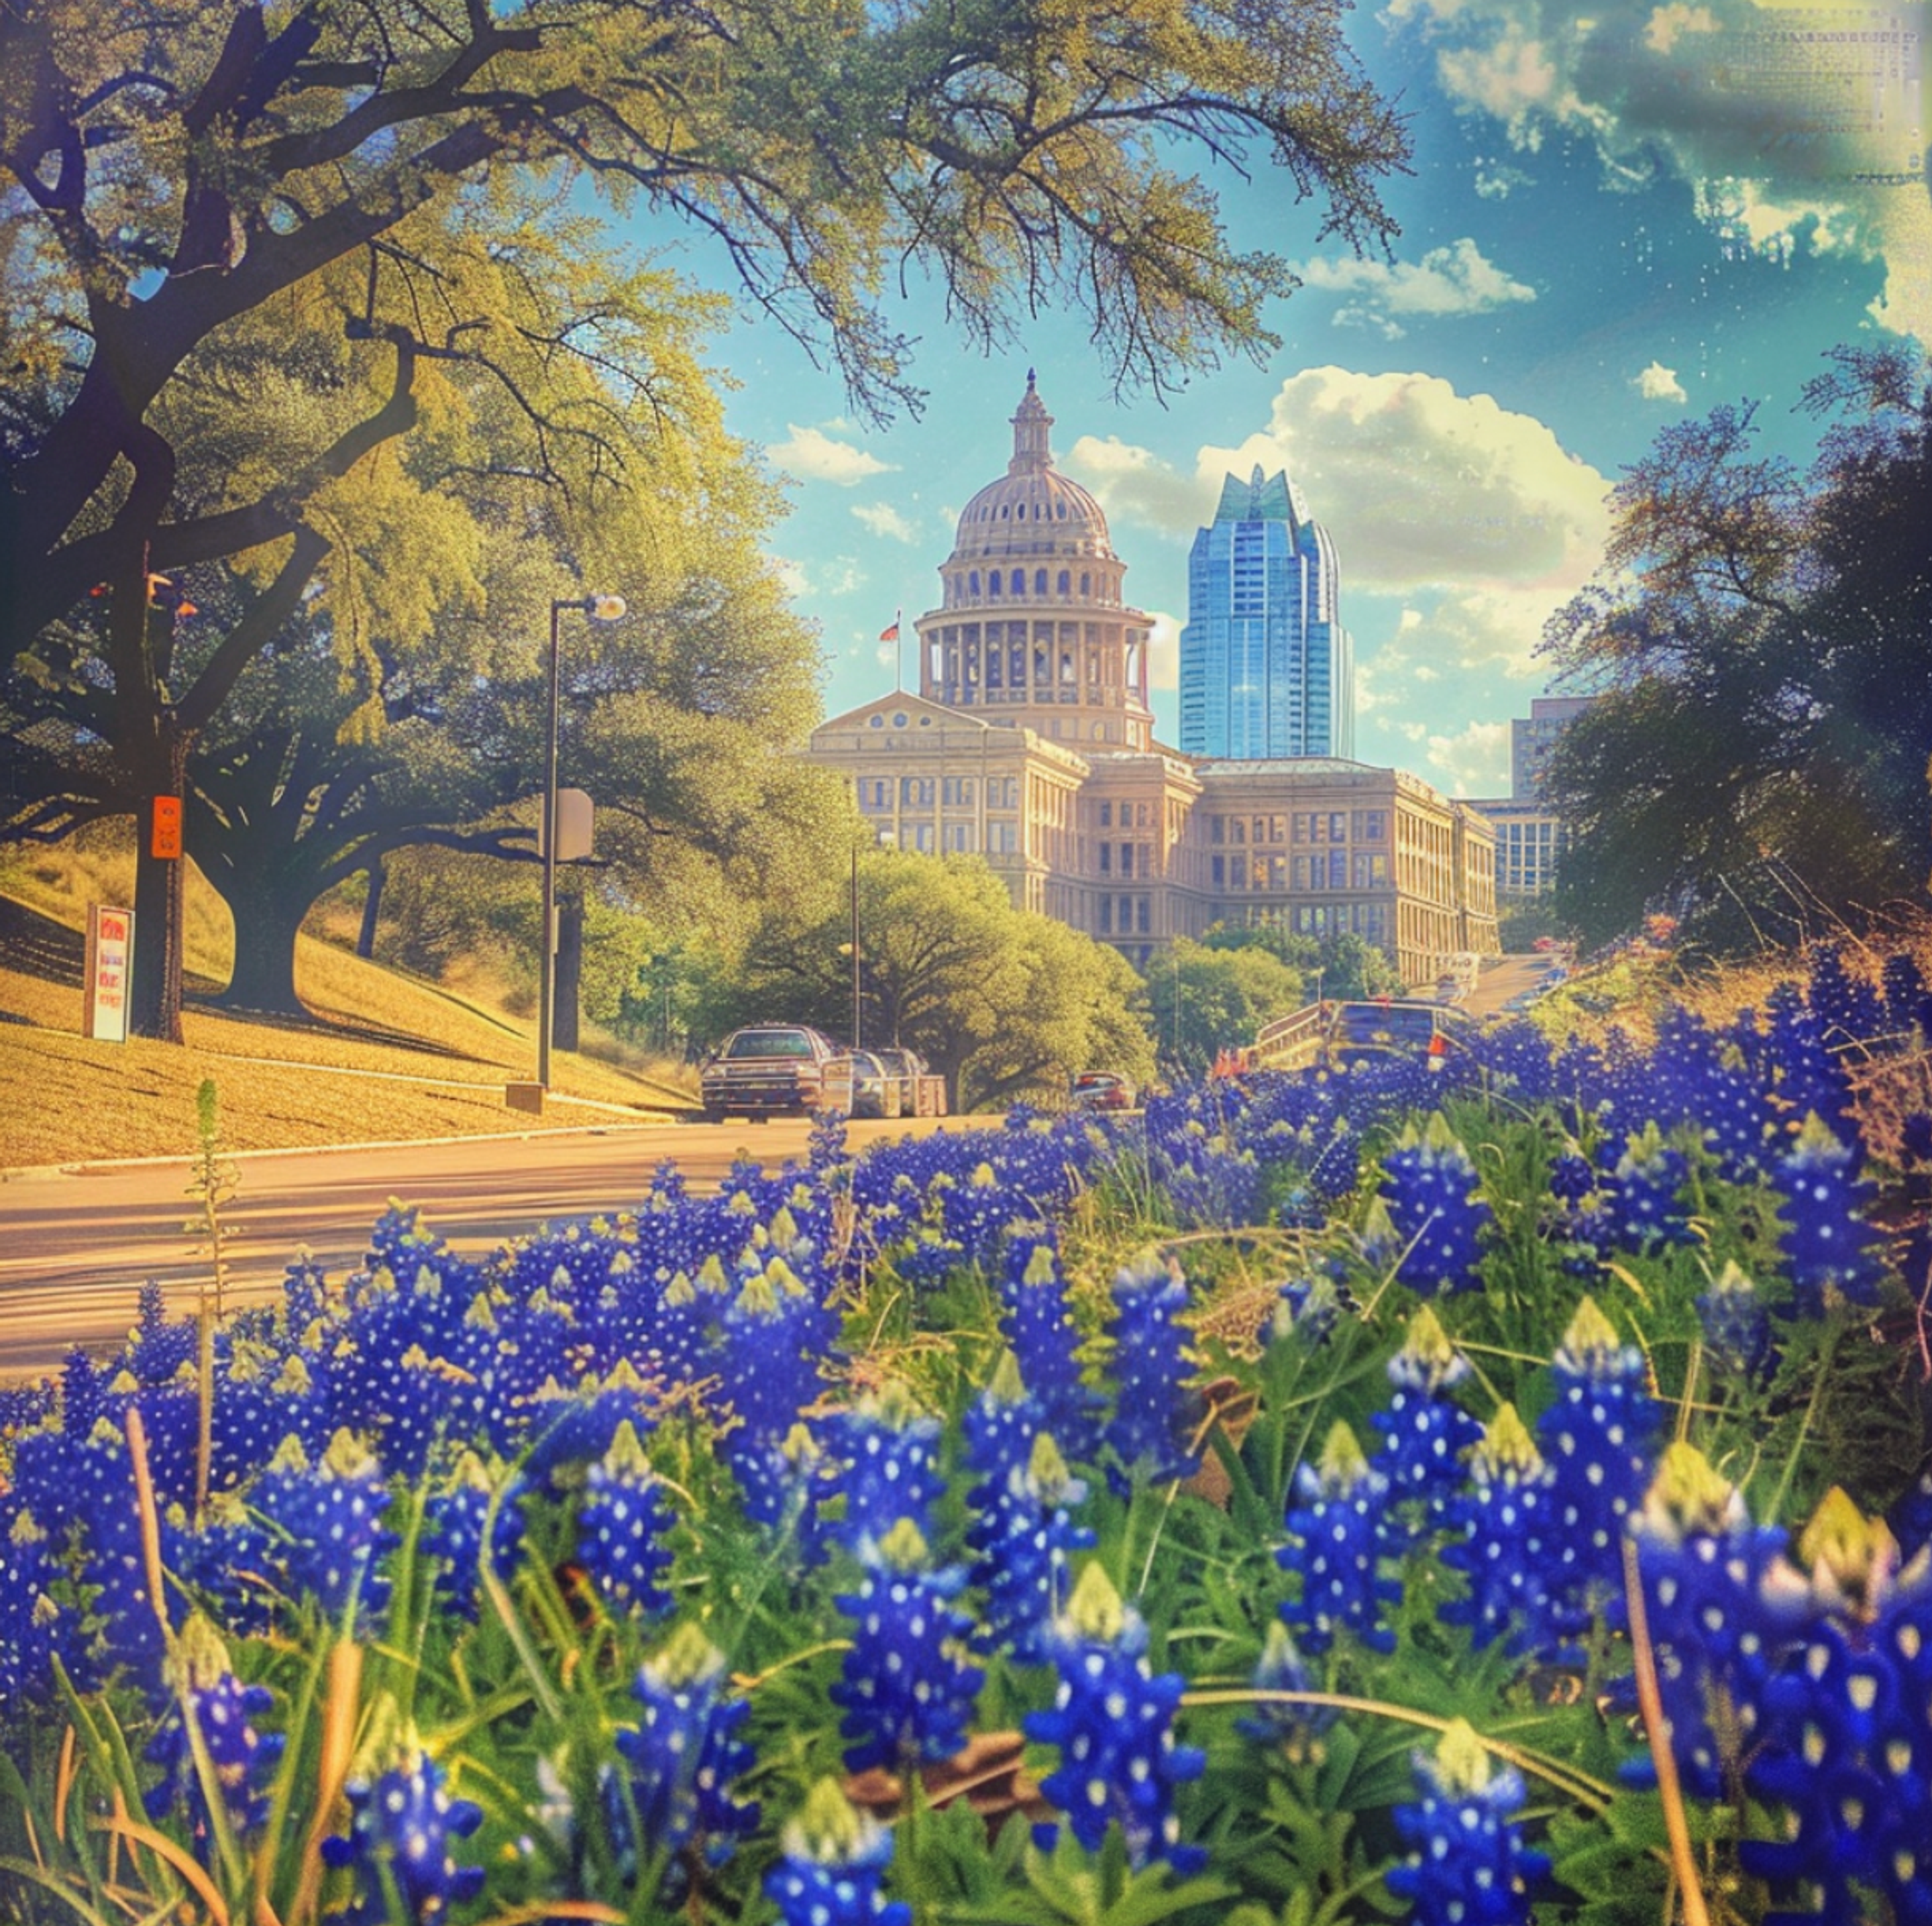 A carpet of Texas bluebonnets in the foreground with the Texas State Capitol building and modern skyscrapers rising in the backdrop under a bright blue sky in Austin, TX, reflecting the city’s vibrant spirit and the local love for native blooms in flower delivery.